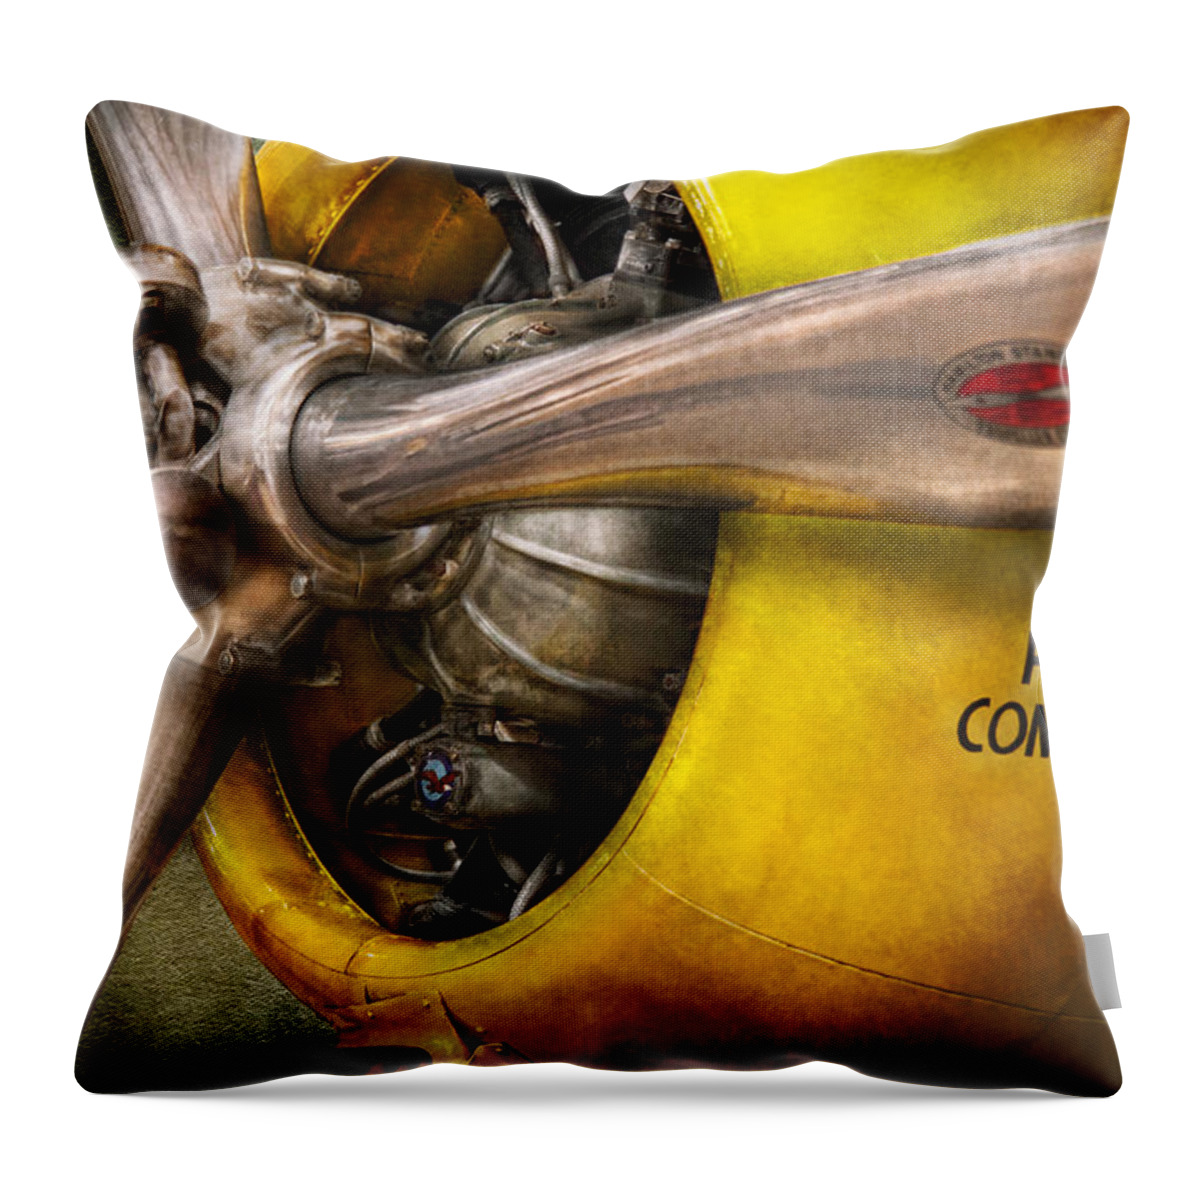 Airplane Throw Pillow featuring the photograph Plane - Pilot - Prop - Twin Wasp by Mike Savad